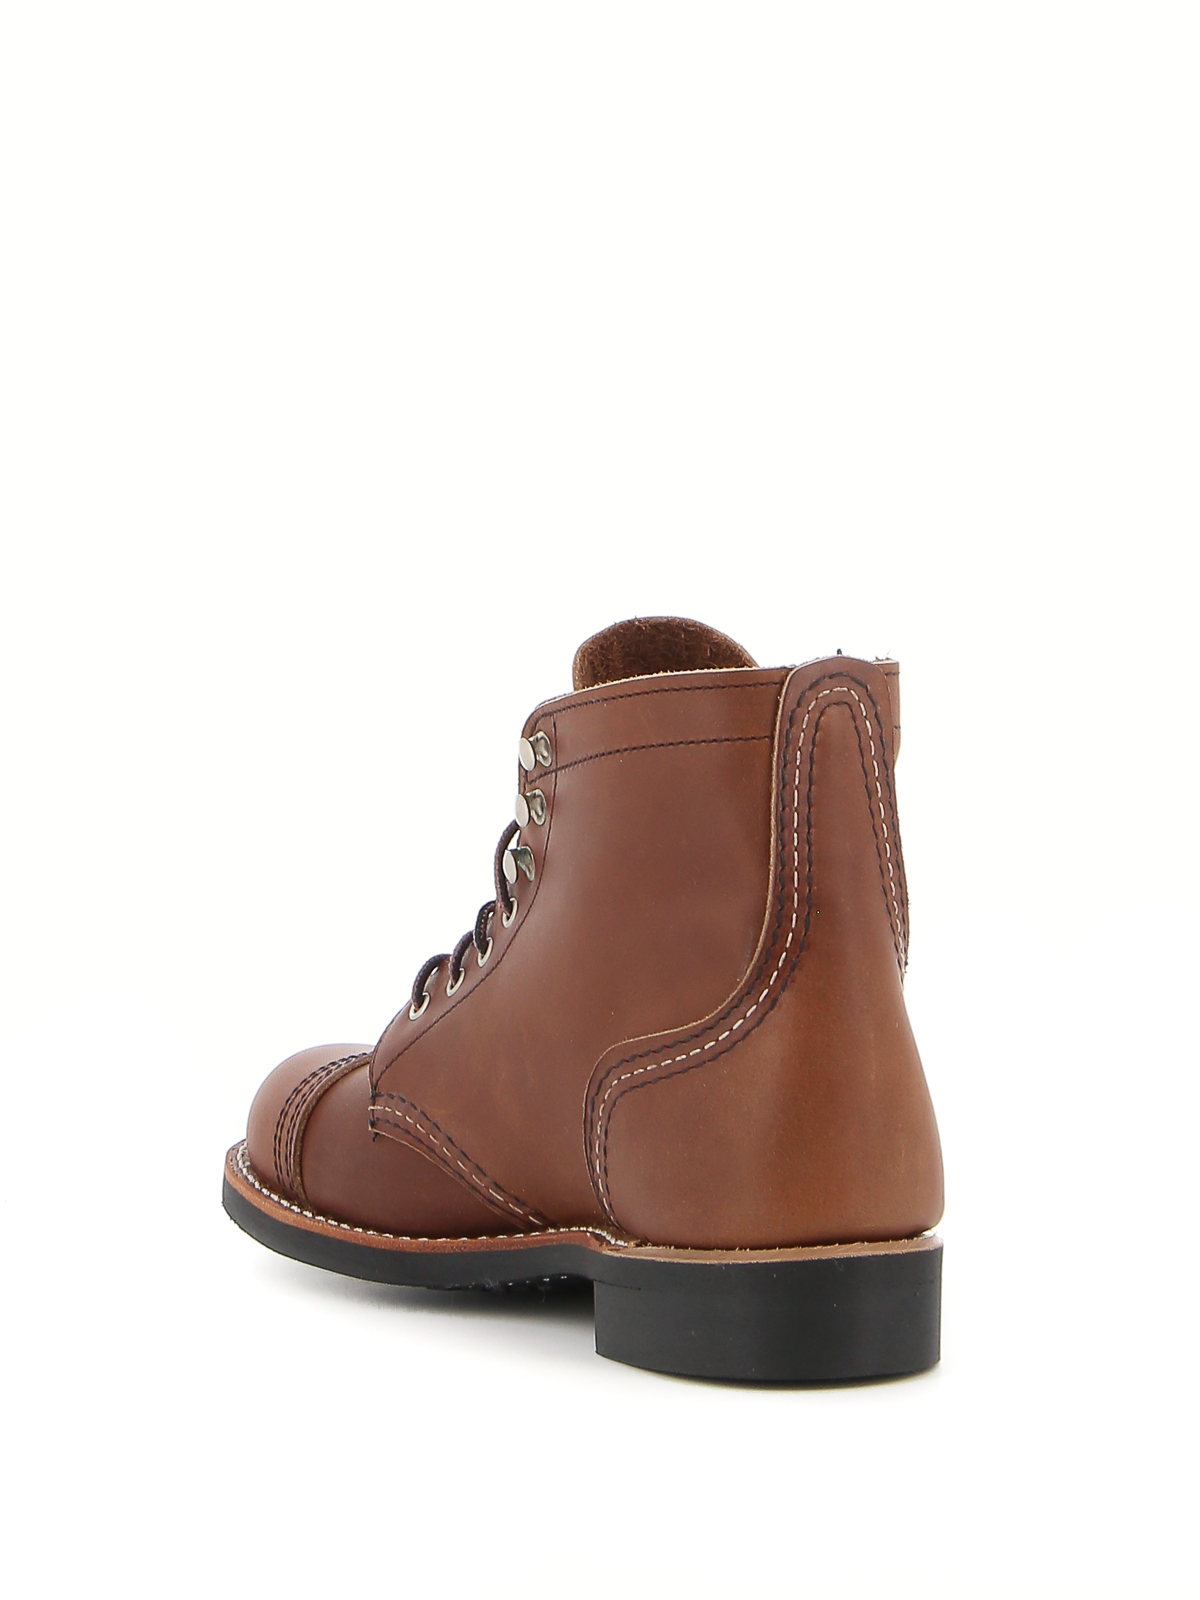 red wing ankle boots